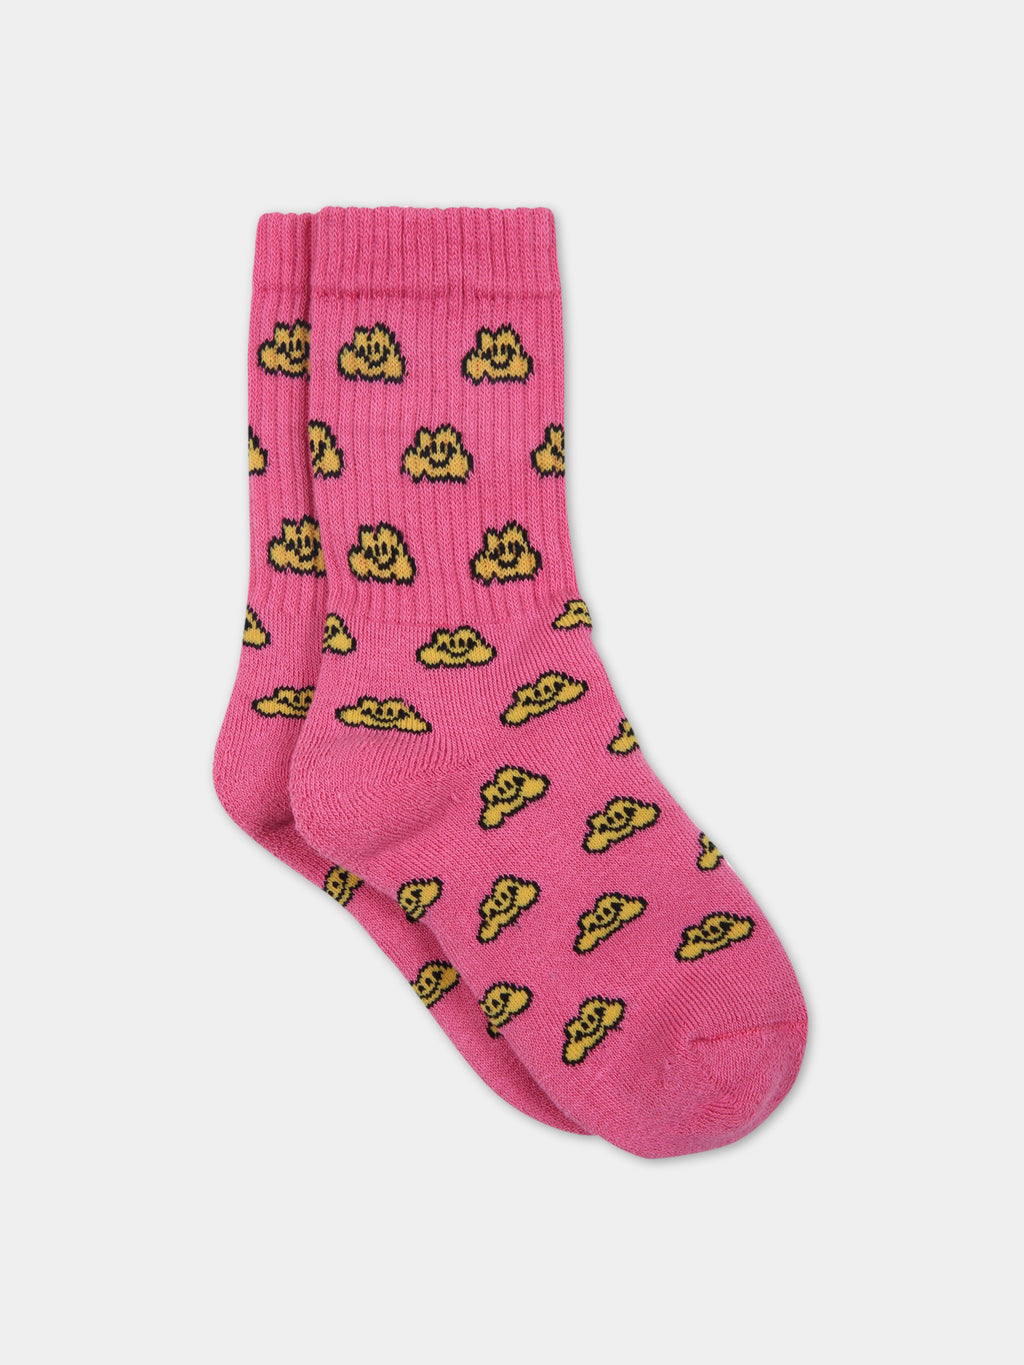 Fuchsia socks for kids with yellow clouds